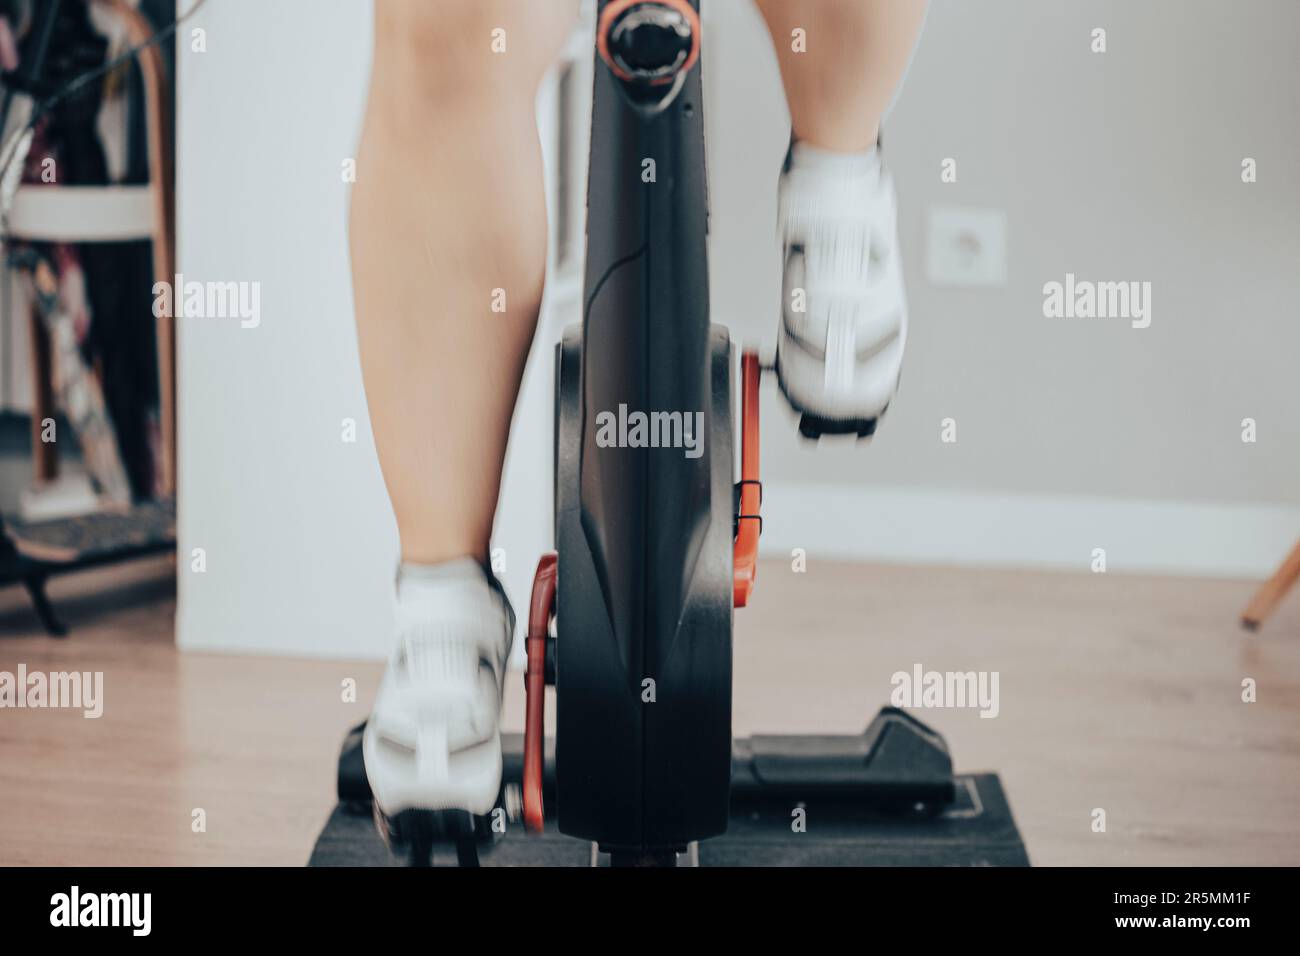 Women leg with white cycling boots cycling on a spinning gym bike indoor scene with motion fast blur Stock Photo